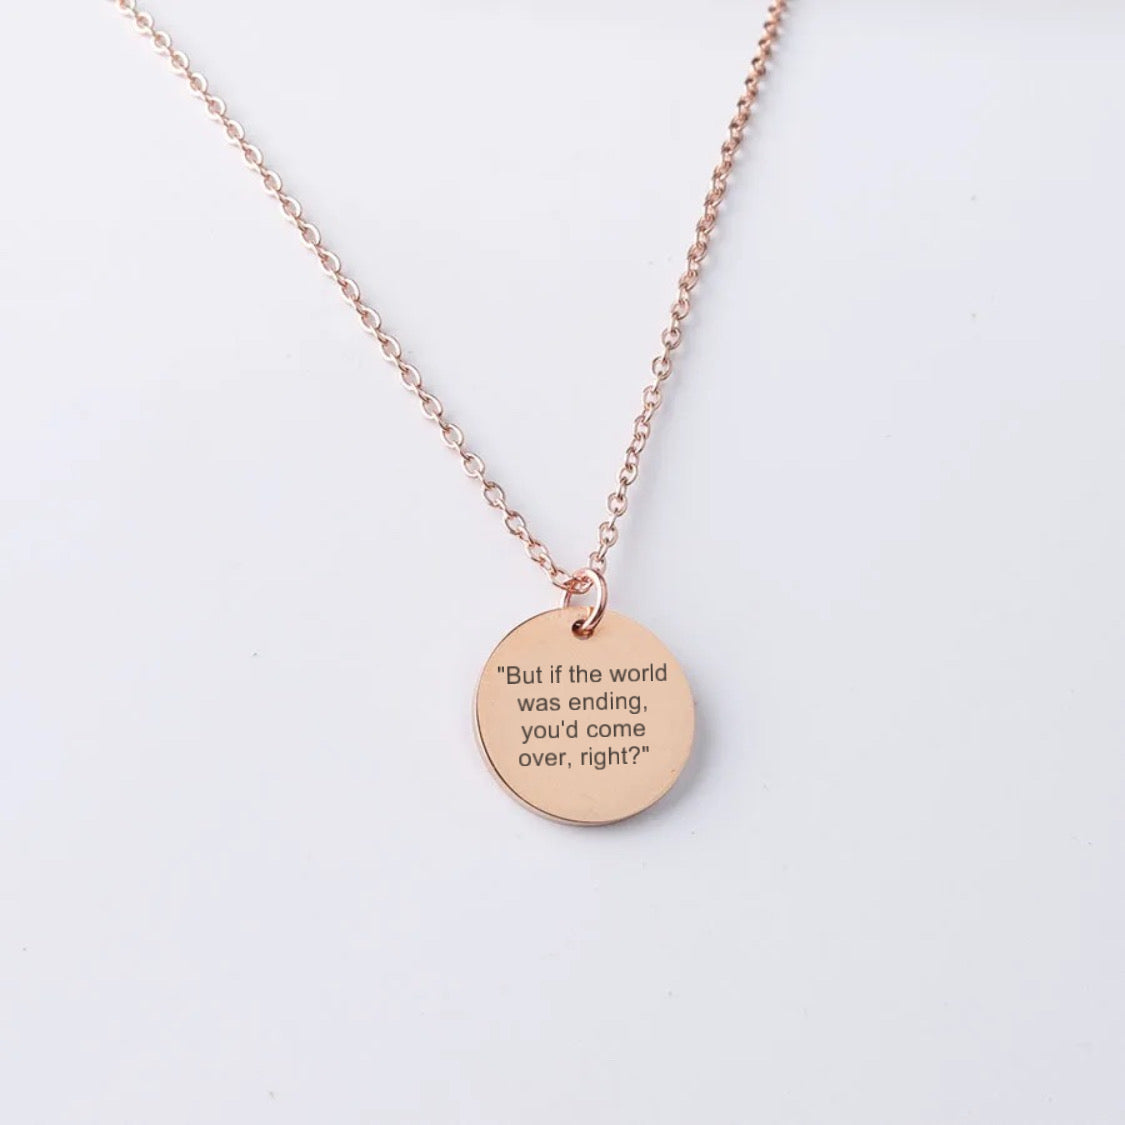 Custom engraved necklace with your words stainless steel